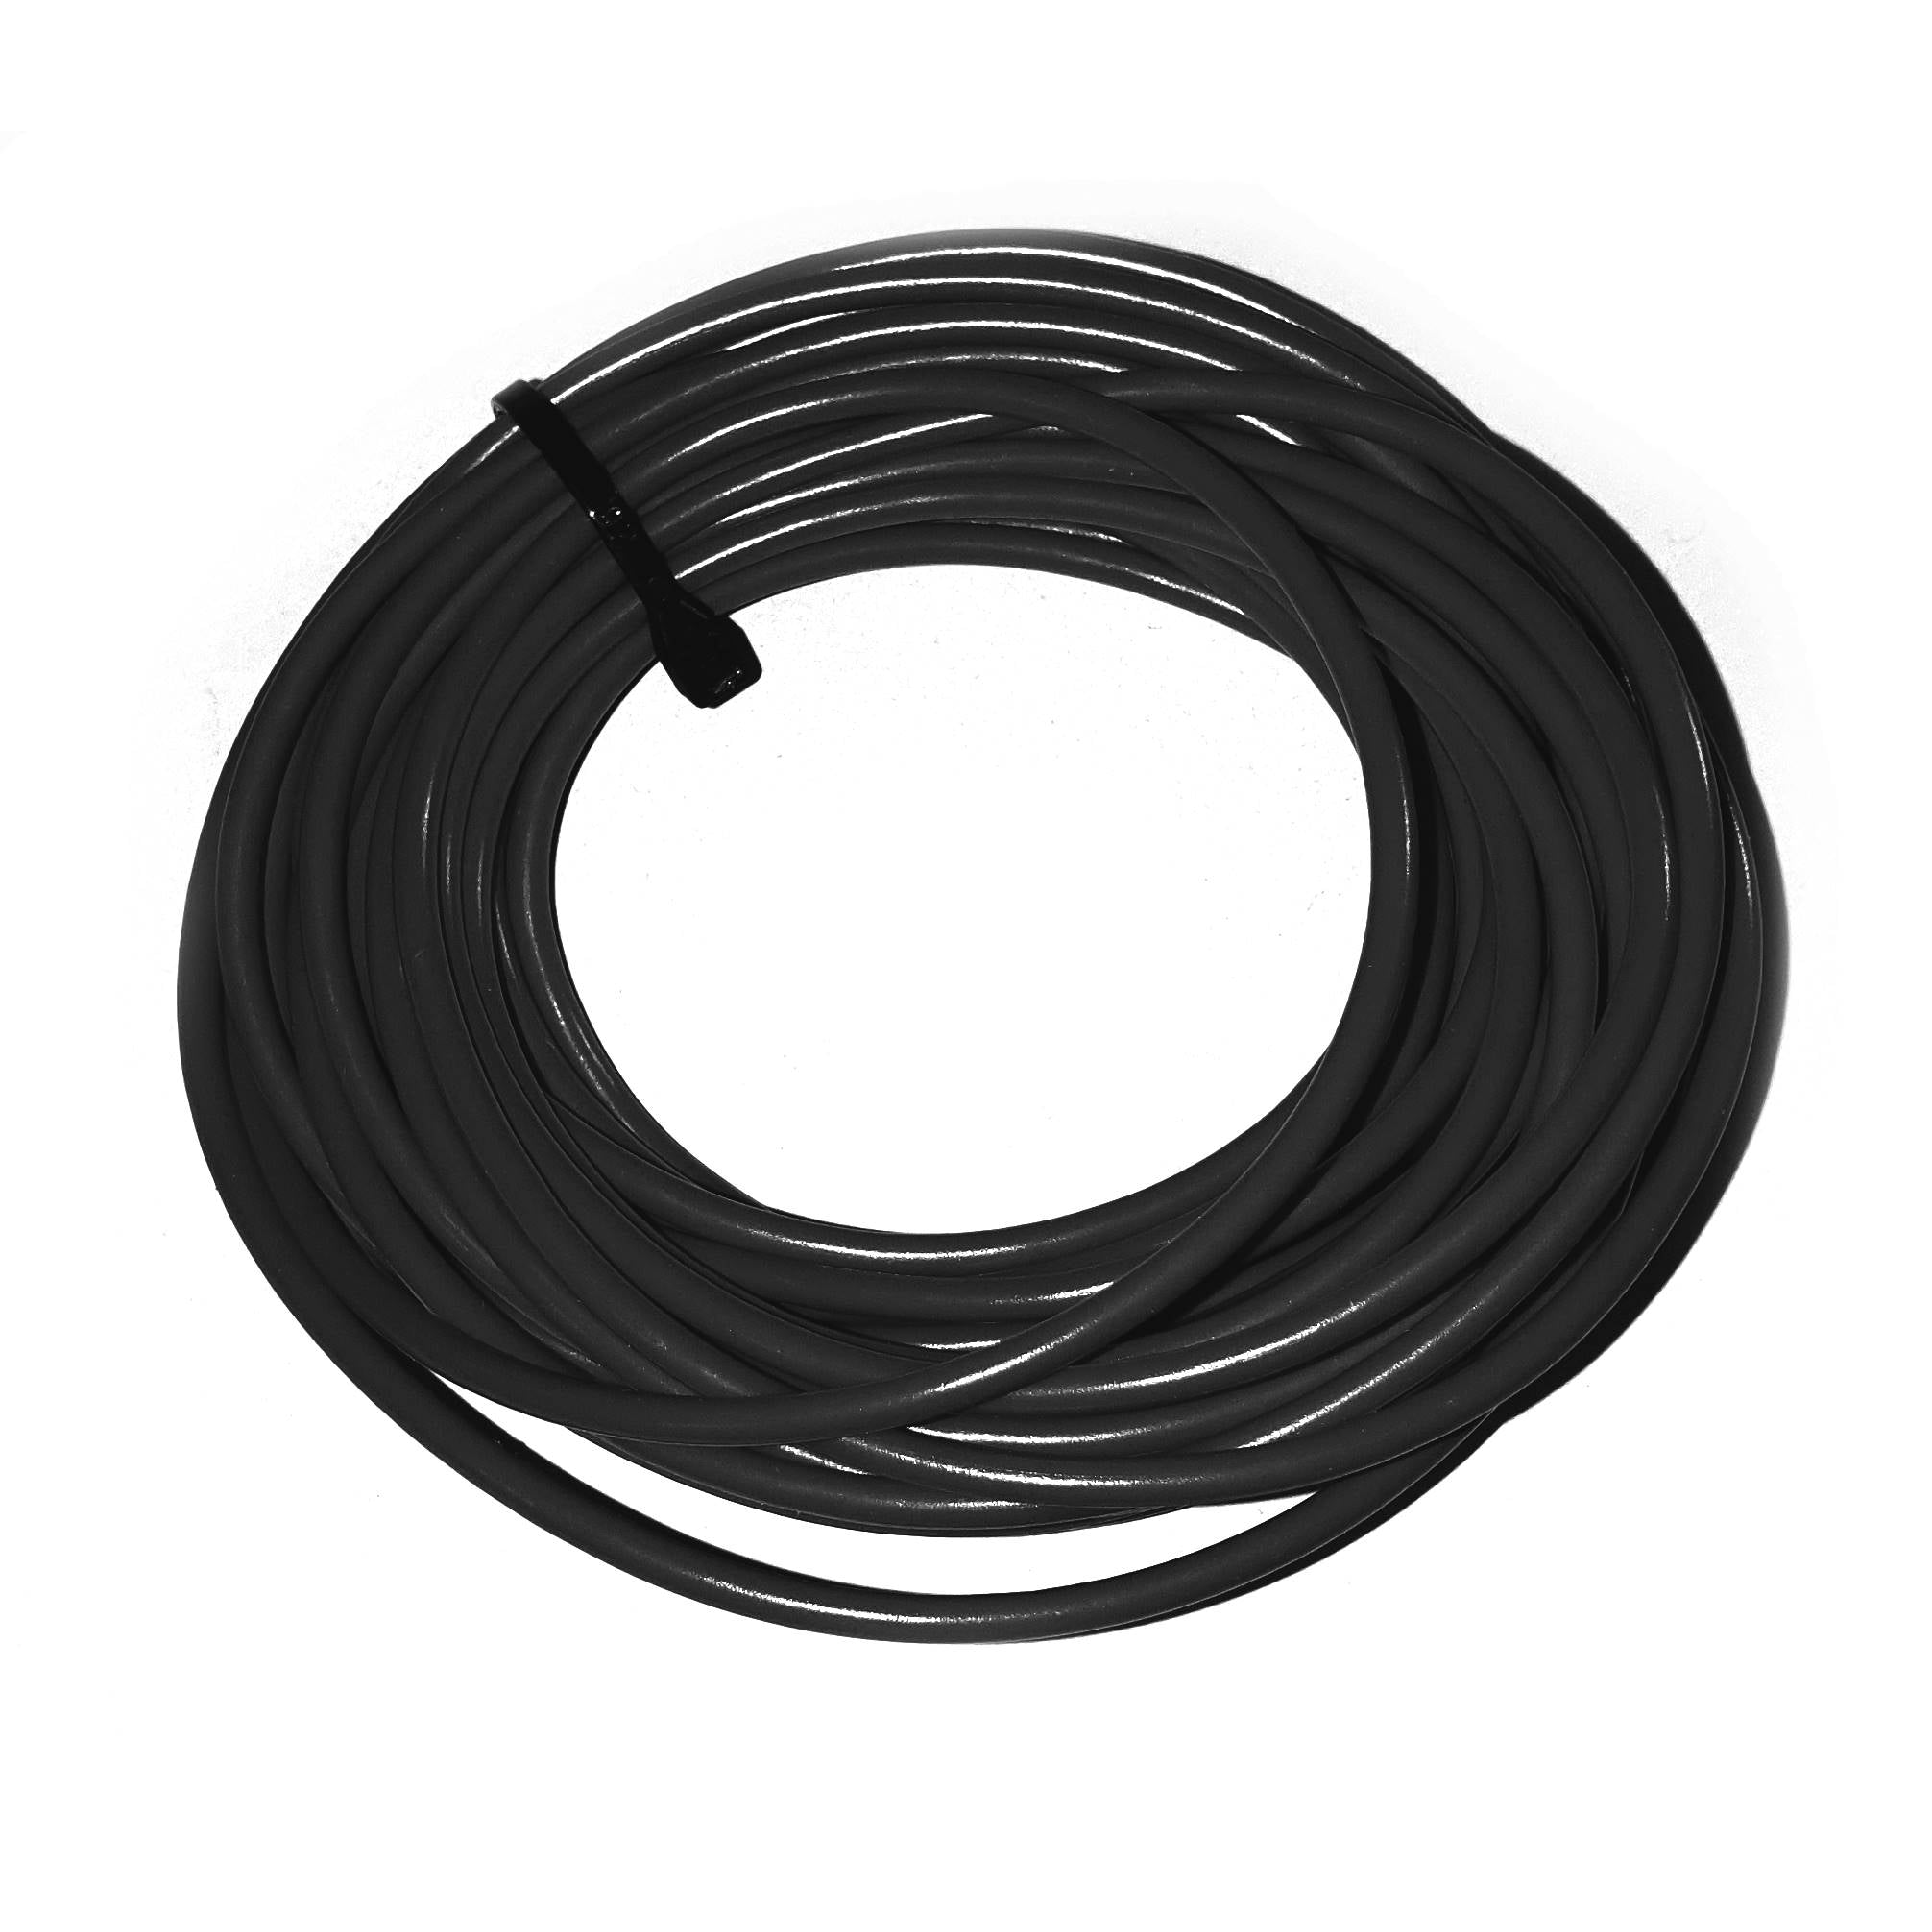 55/0.1mm Extra Flexible Cable Black